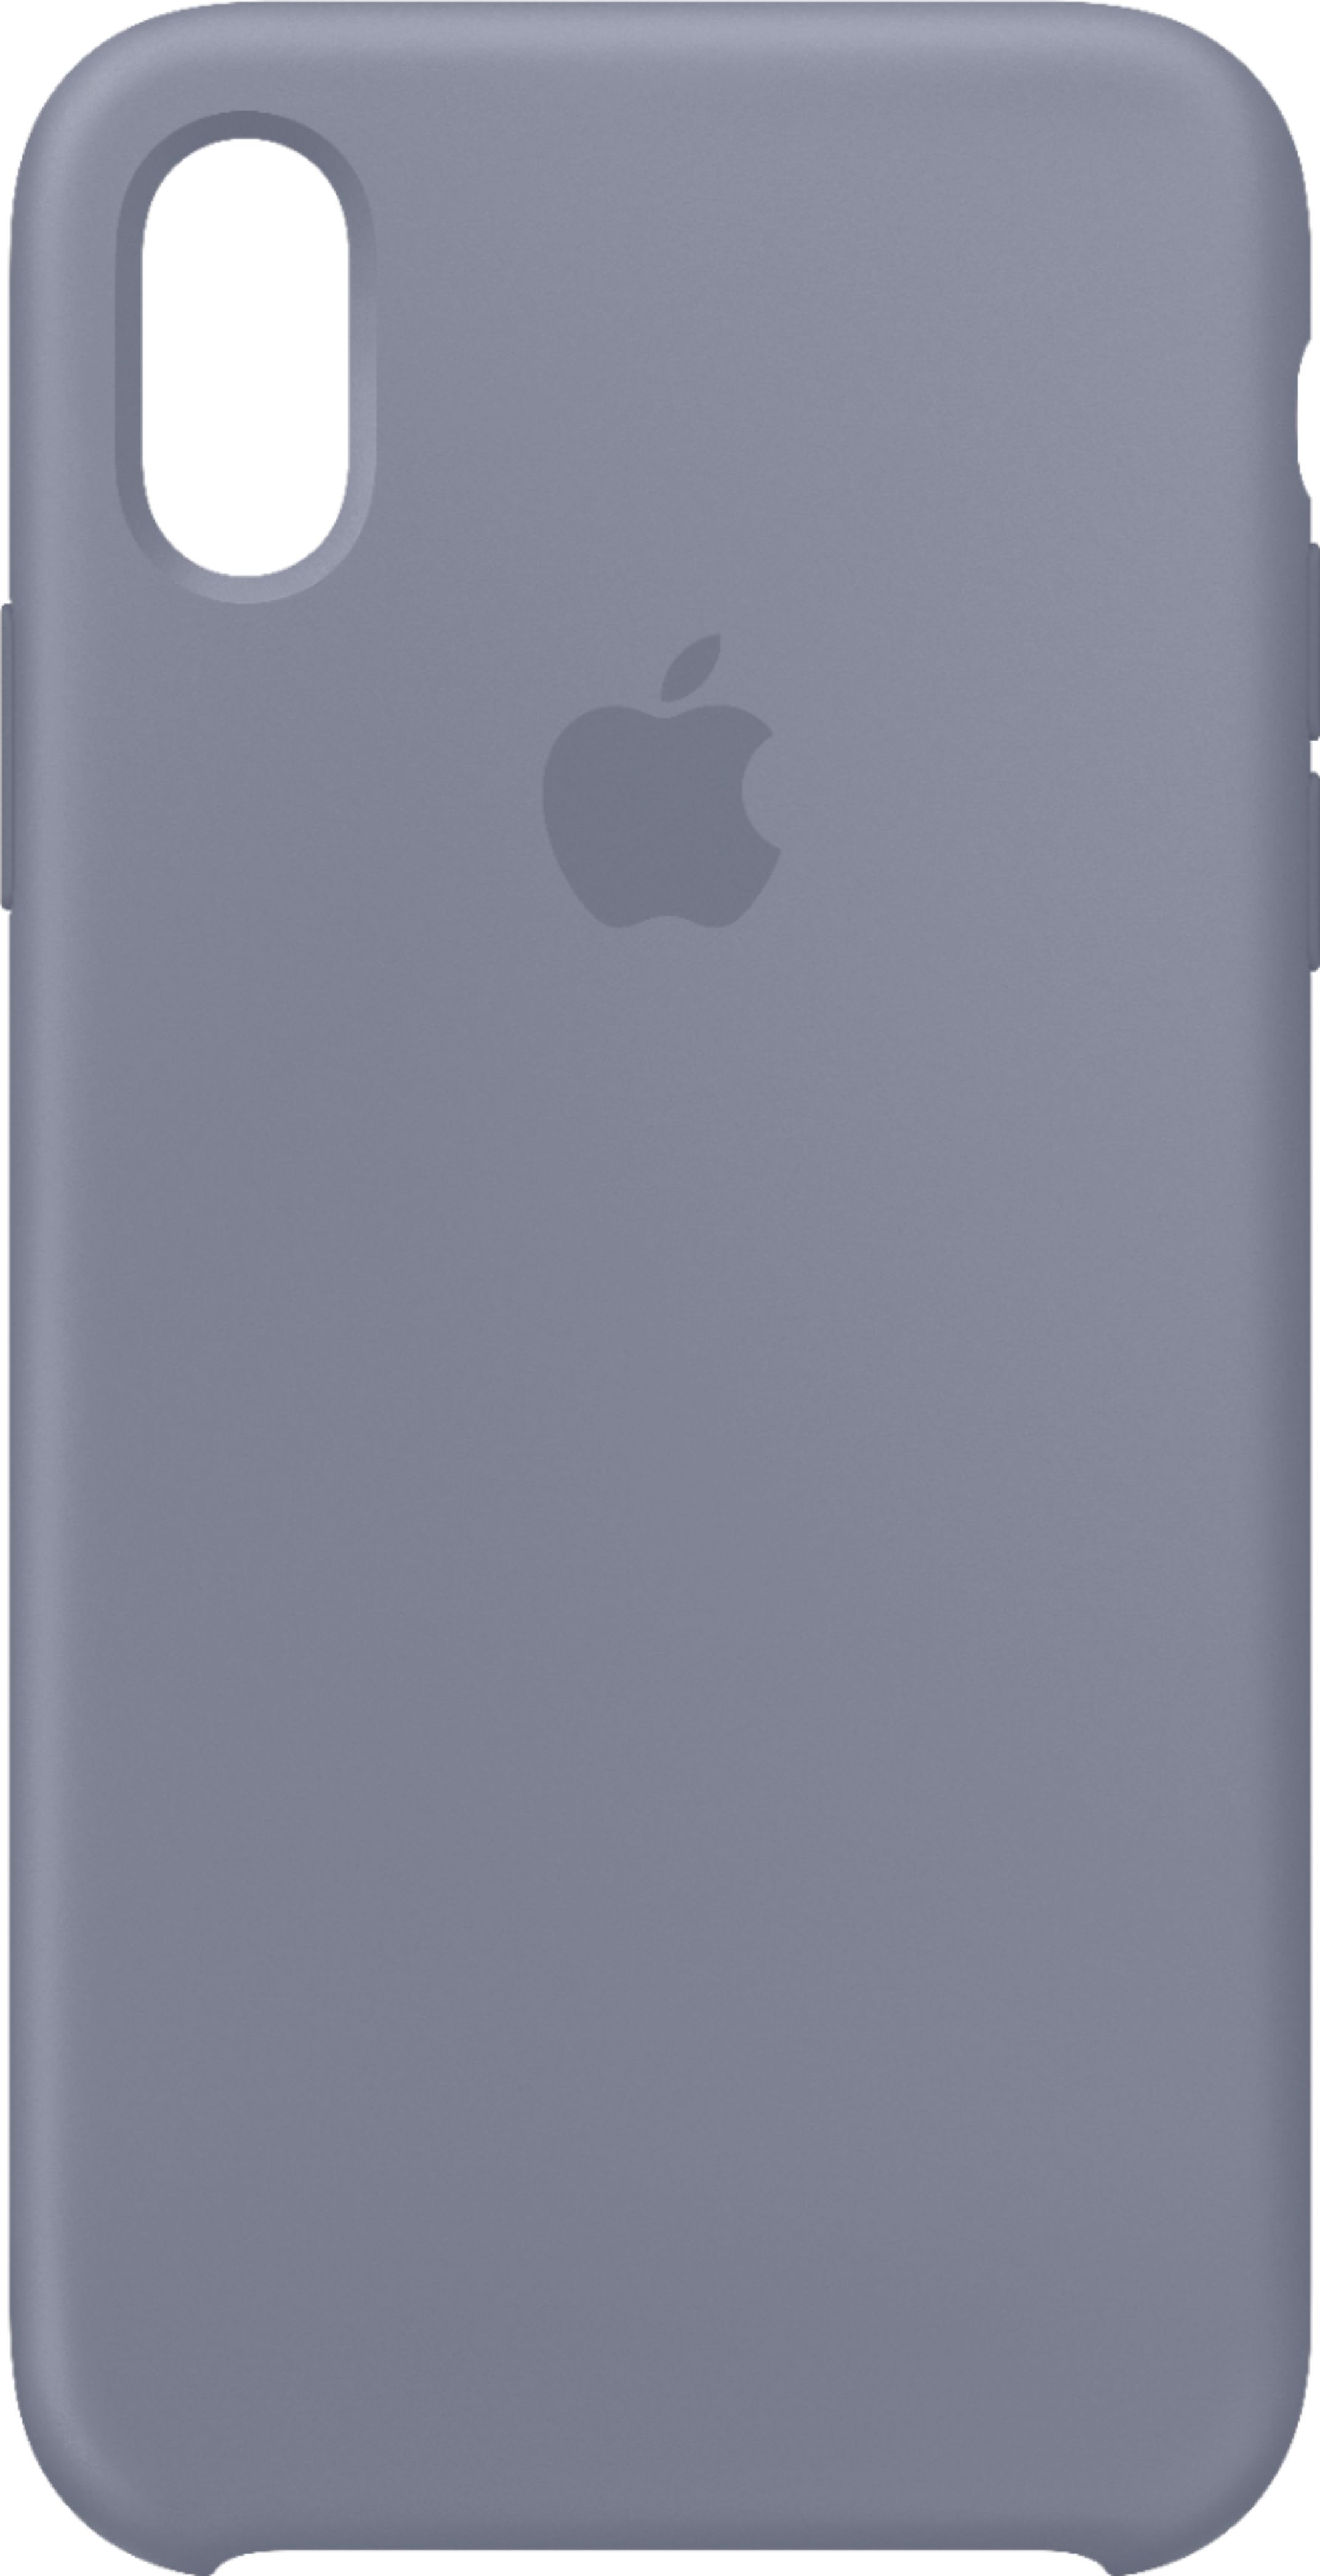  Apple - iPhone® XS Silicone Case - Lavender Gray